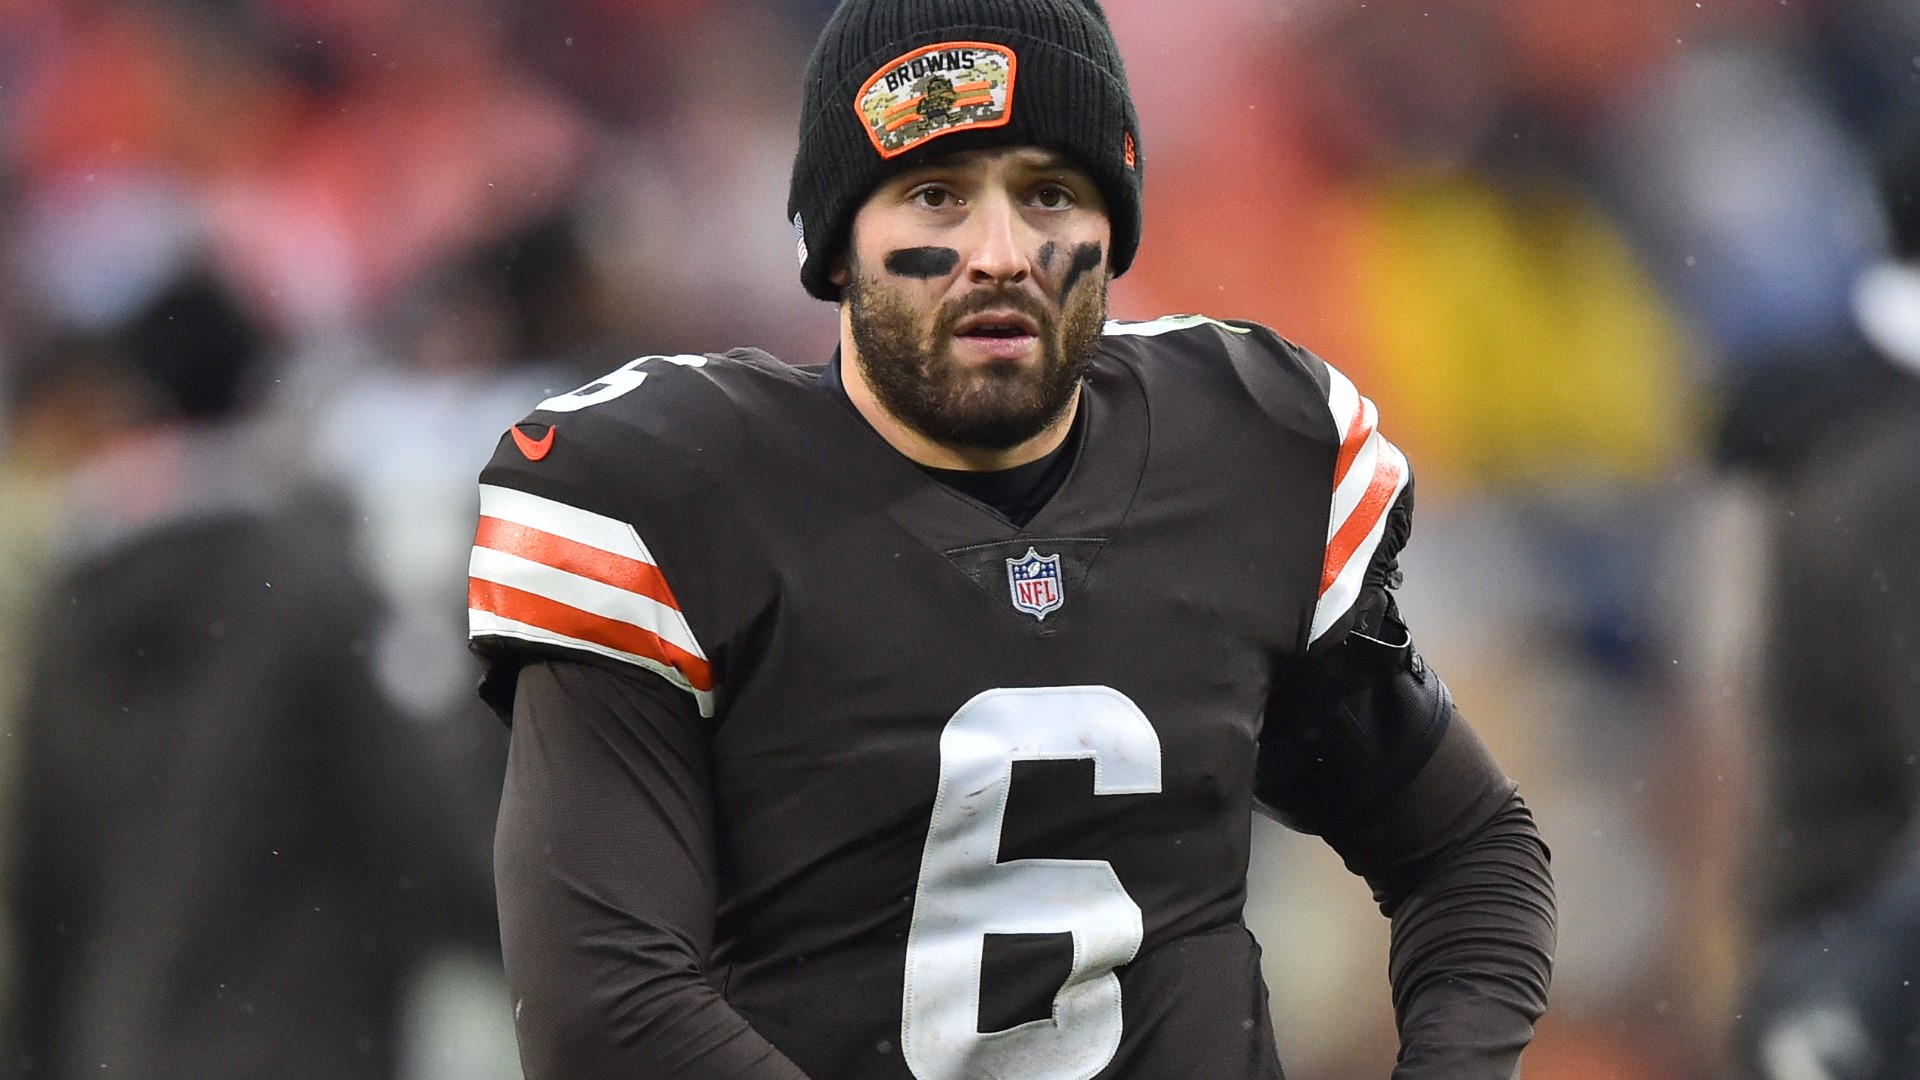 Ben Axelrod previews the Cleveland Browns' matchup with the Baltimore Ravens on Sunday Night Football.